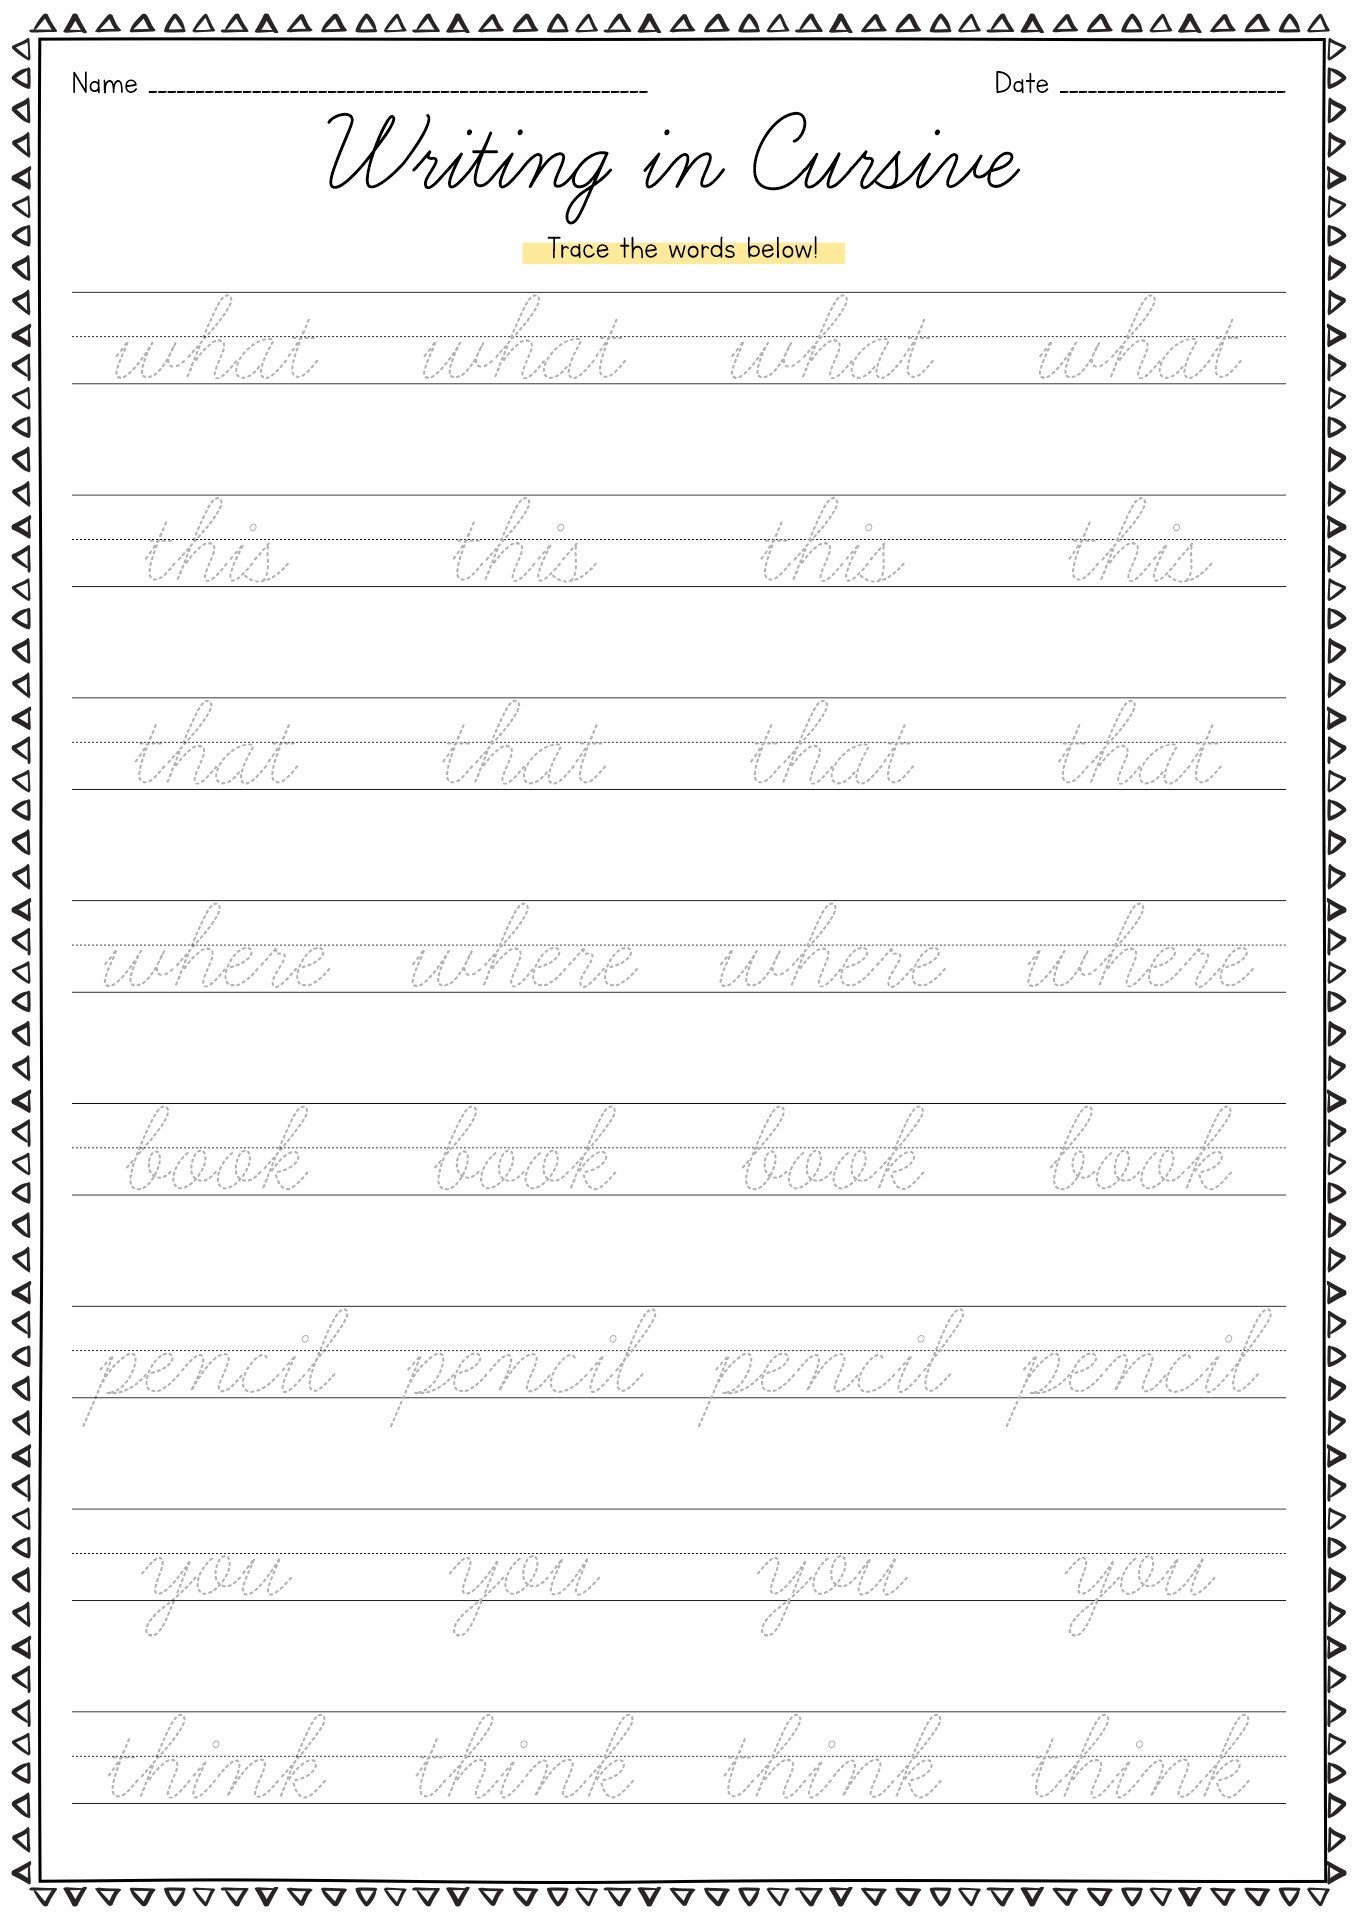 9 Best Images of Penmanship Practice Worksheets For Adults - Free ...